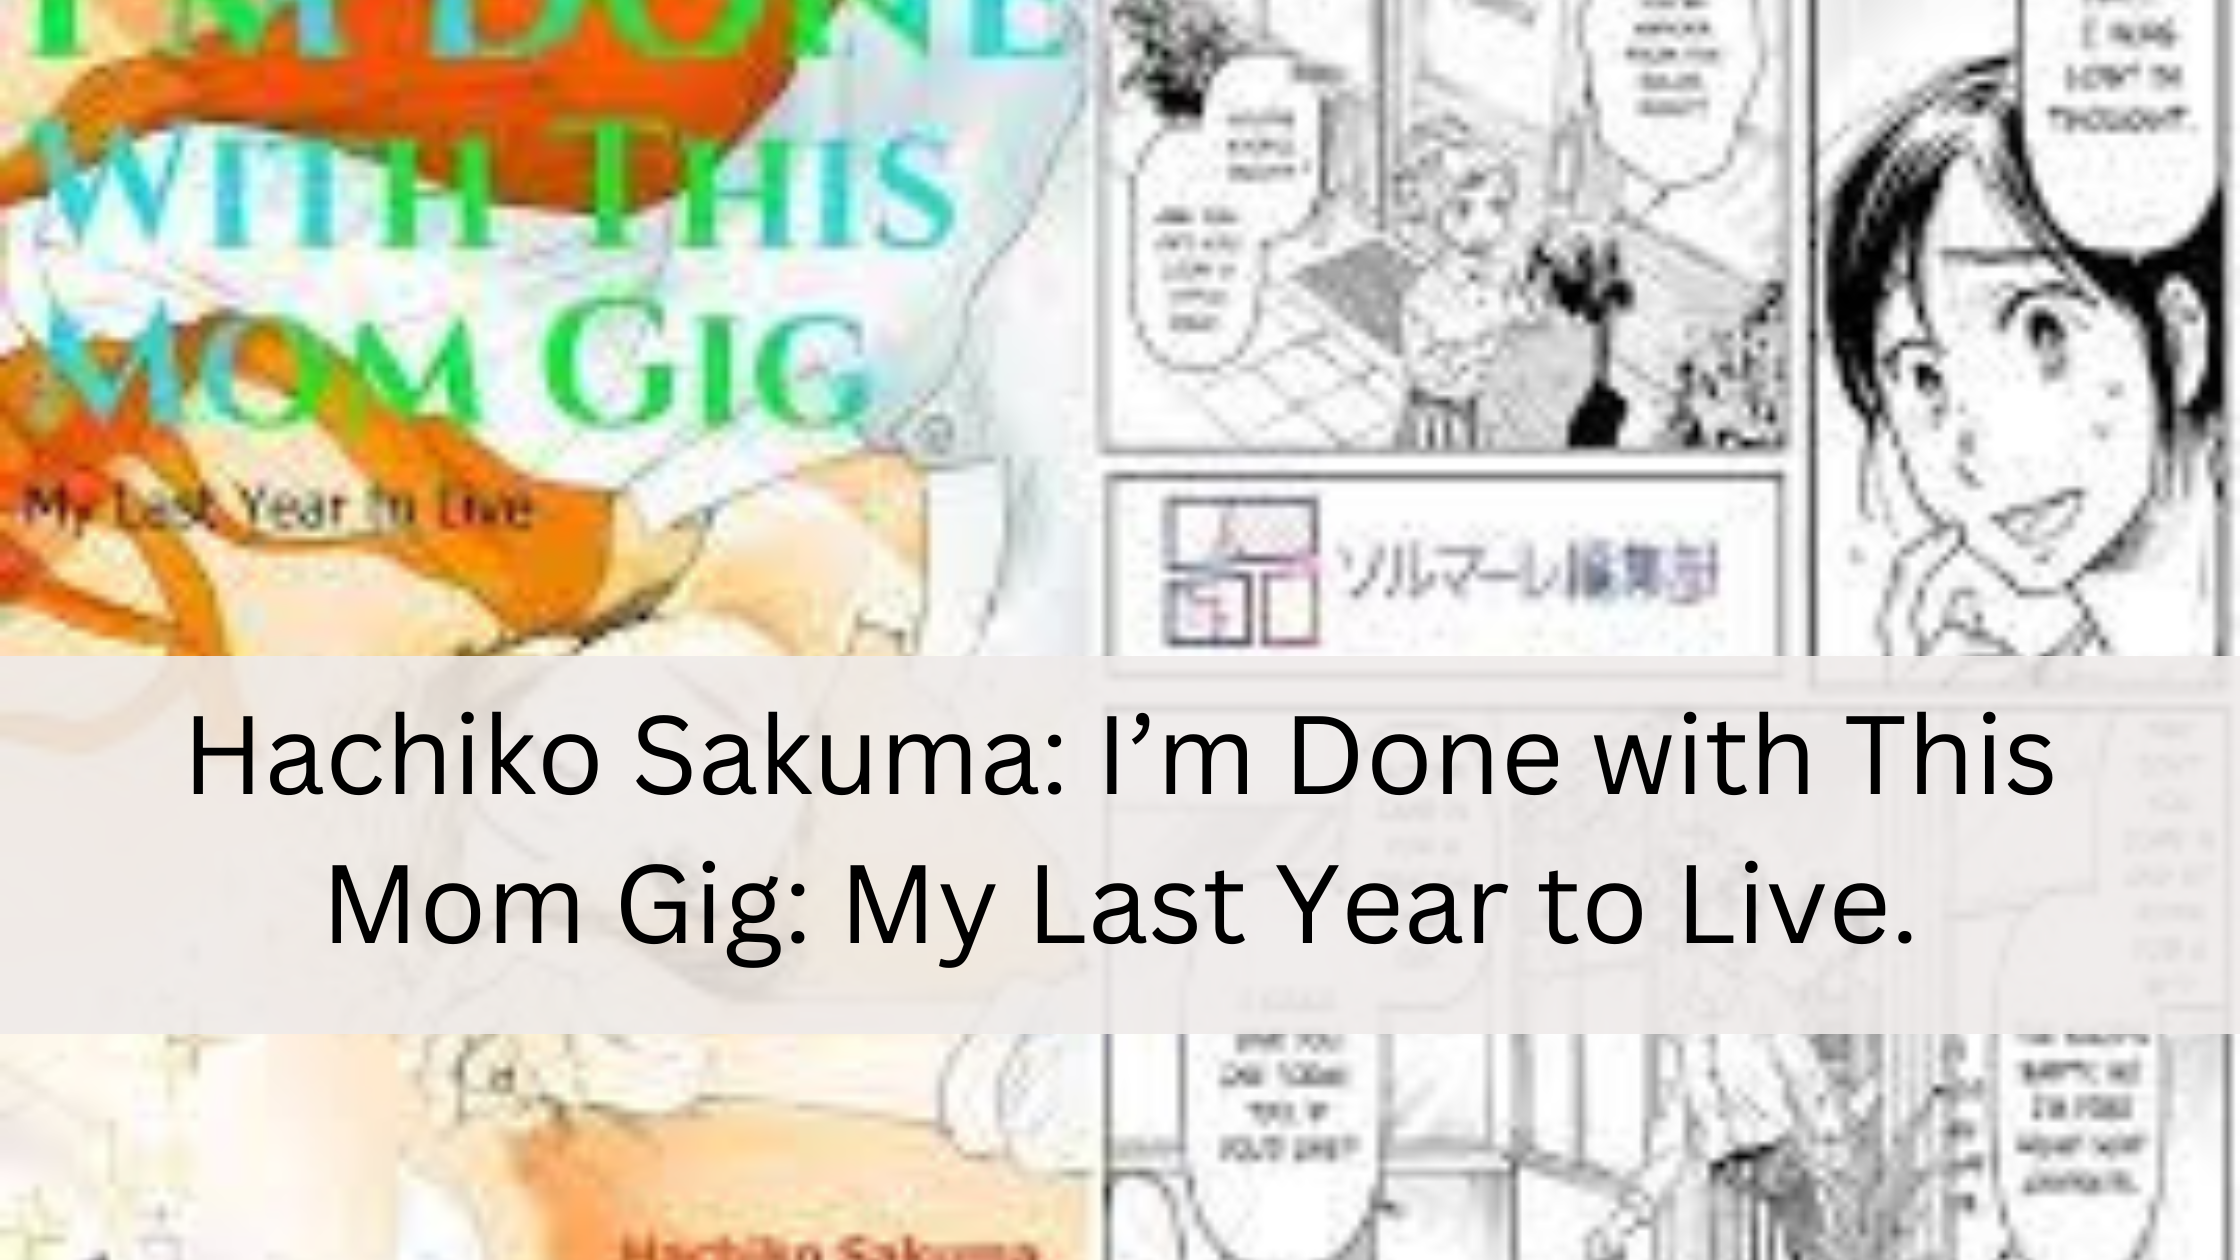 Hachiko Sakuma  I’m Done with This Mom Gig My Last Year to Live.